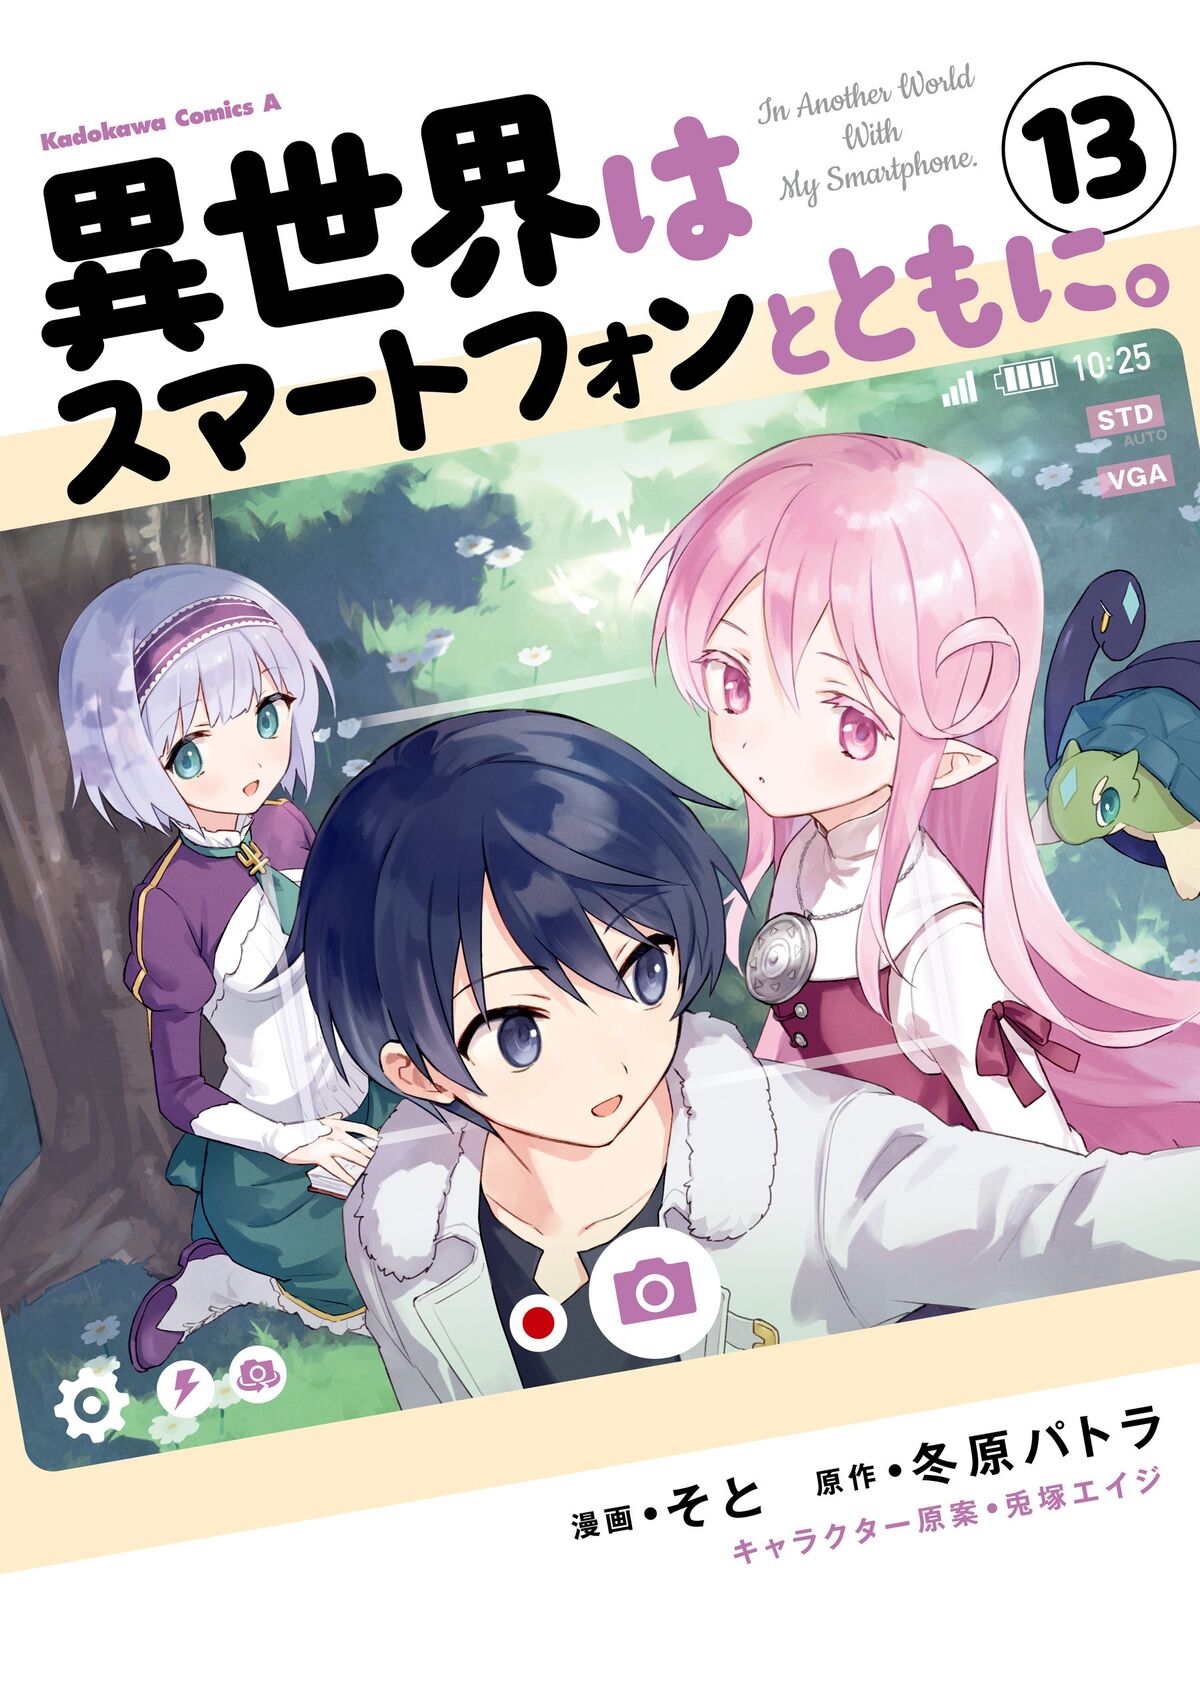 Light Novel Volume 27, In Another World With My Smartphone Wiki